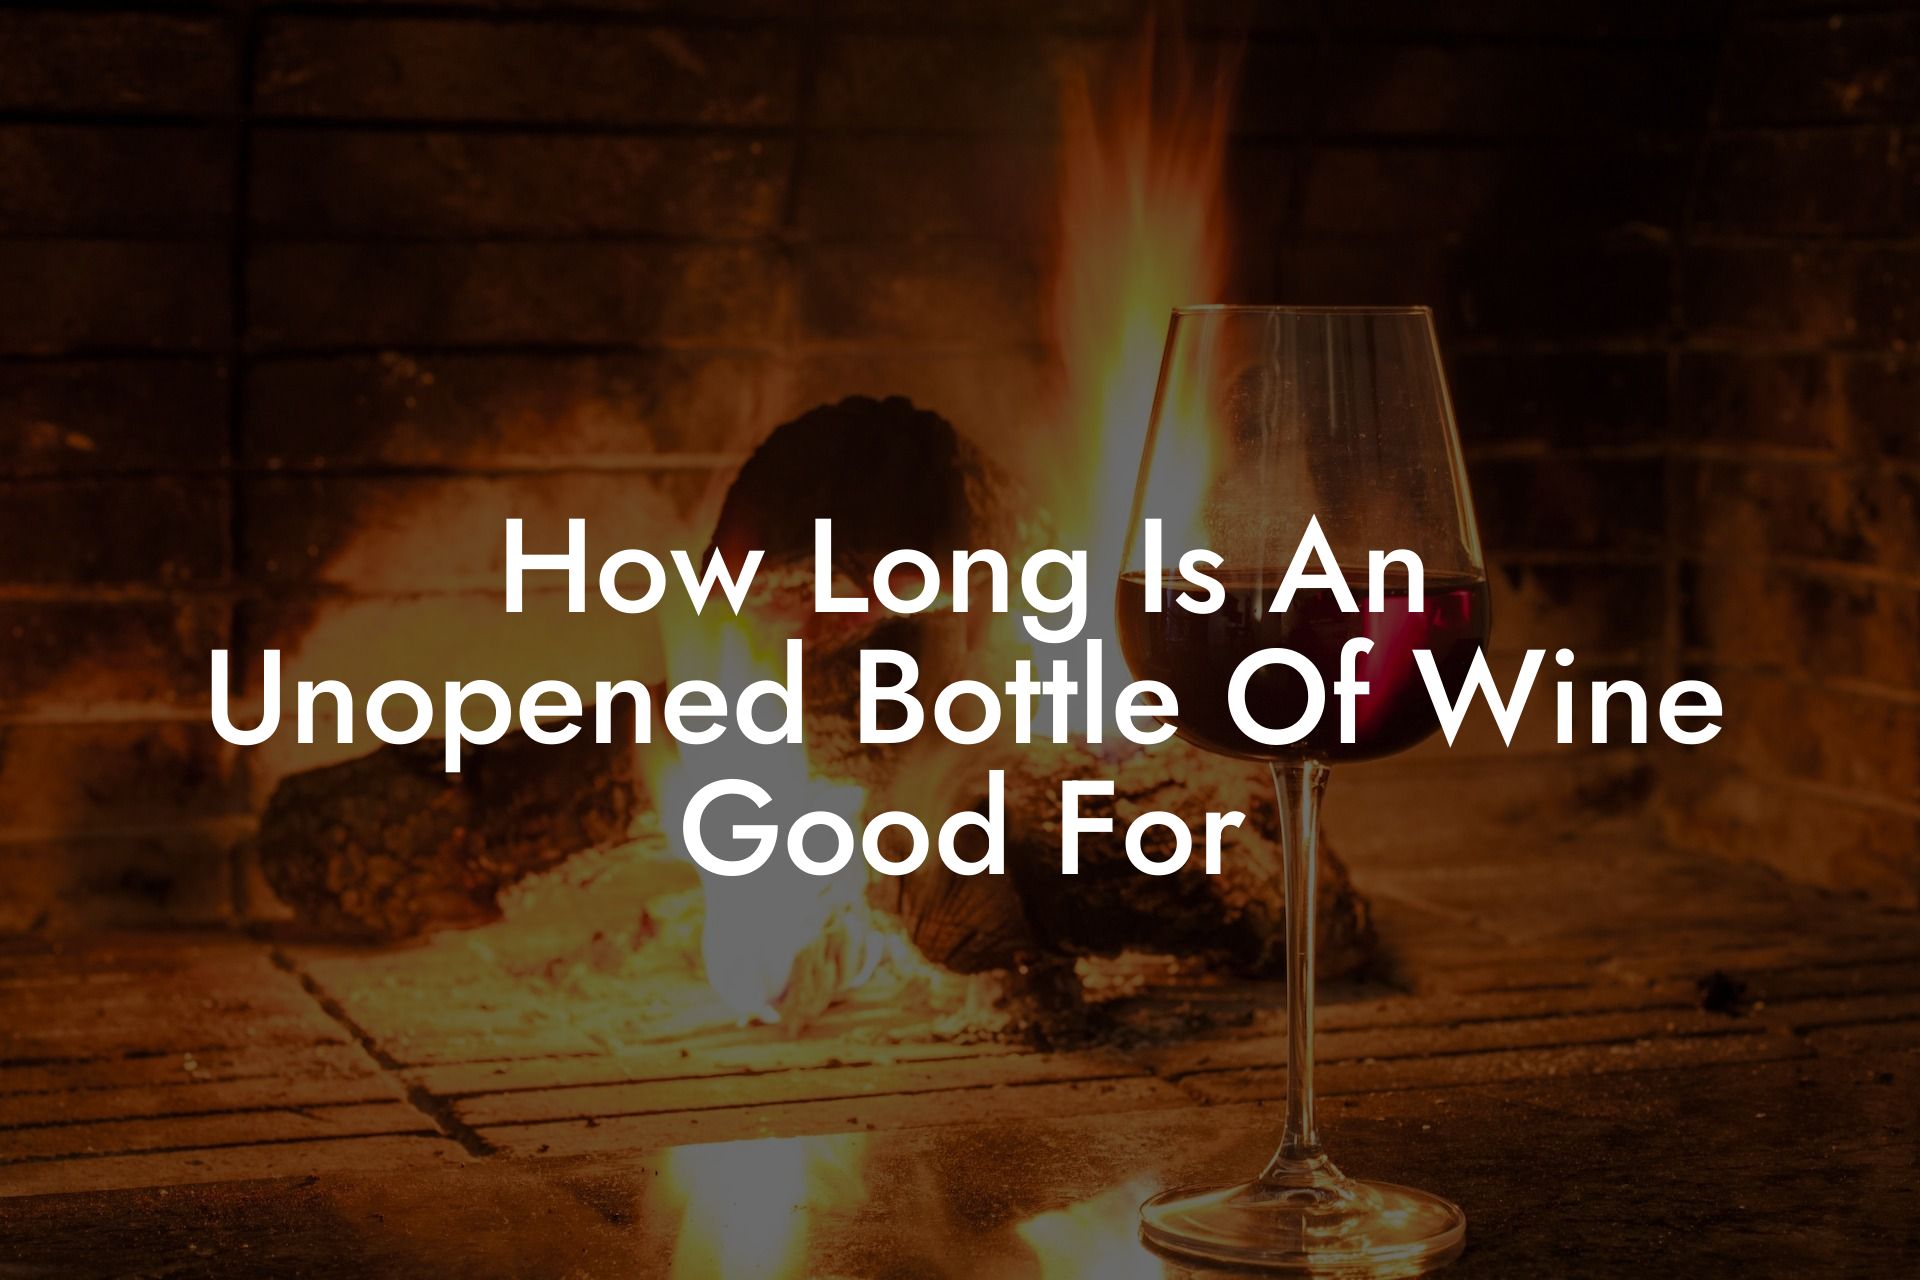 How Long Is An Unopened Bottle Of Wine Good For